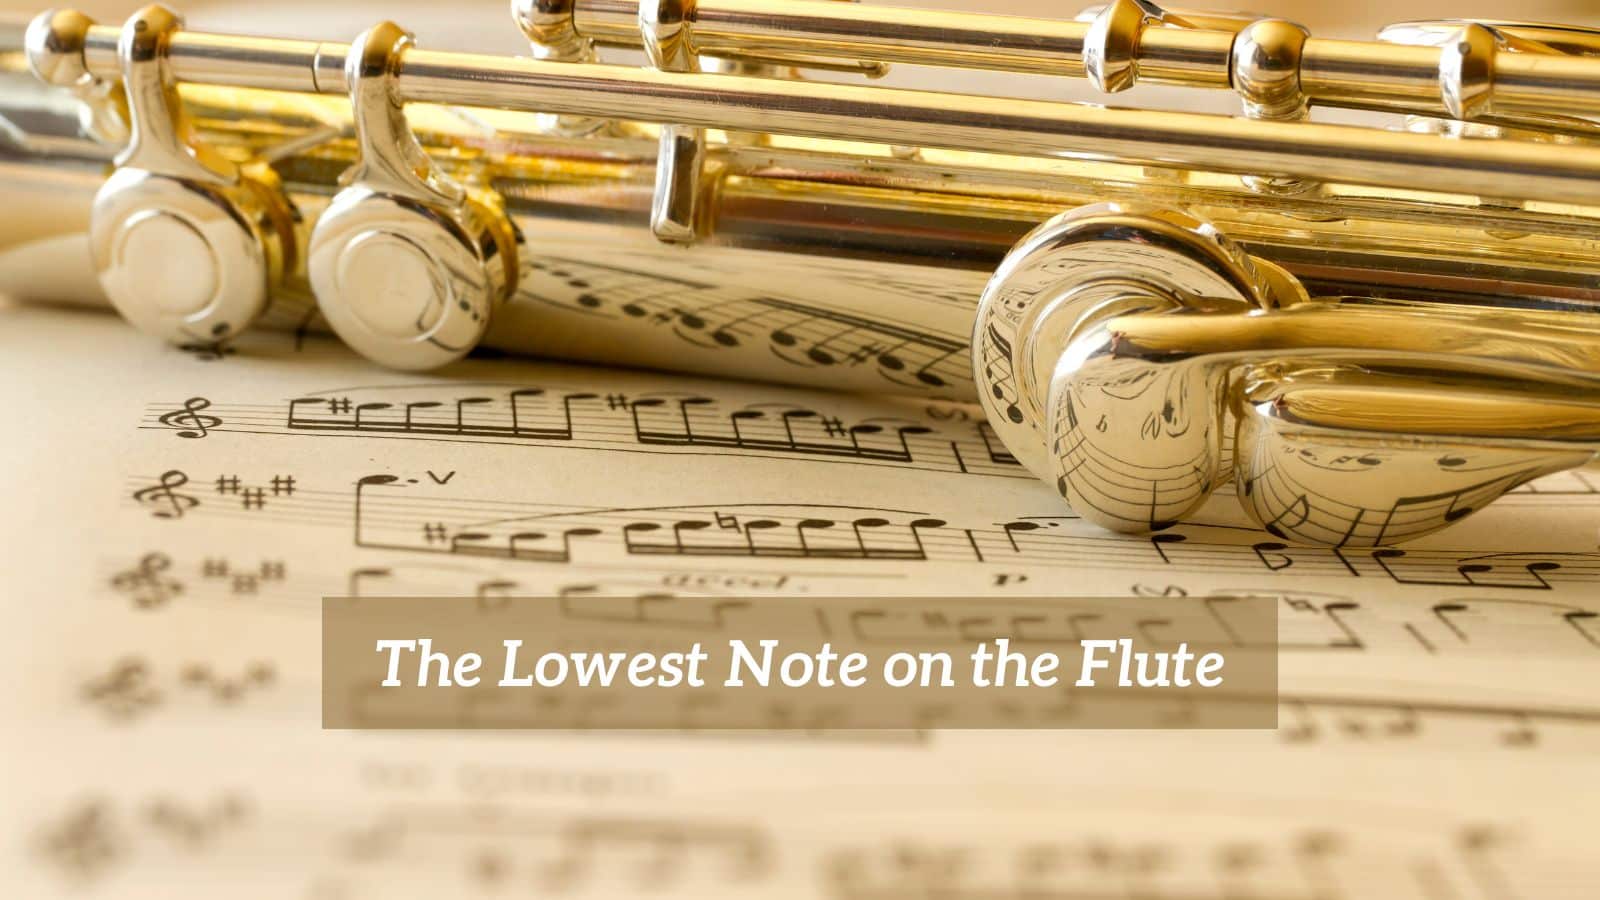 The Lowest Note on the Flute